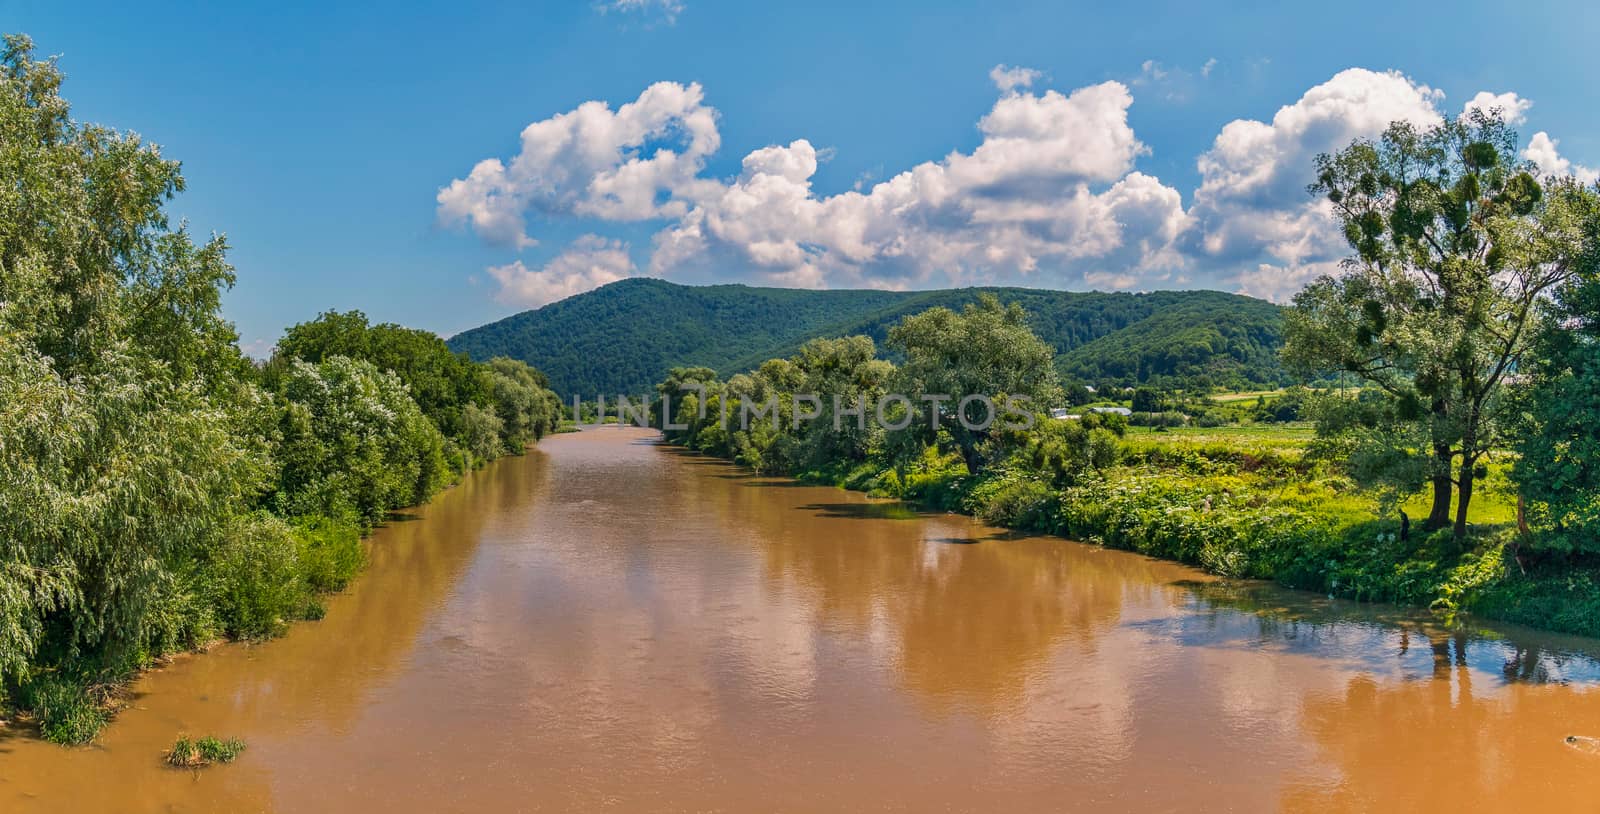 The river with water of color of sand flowing away to a mountain slope by Adamchuk